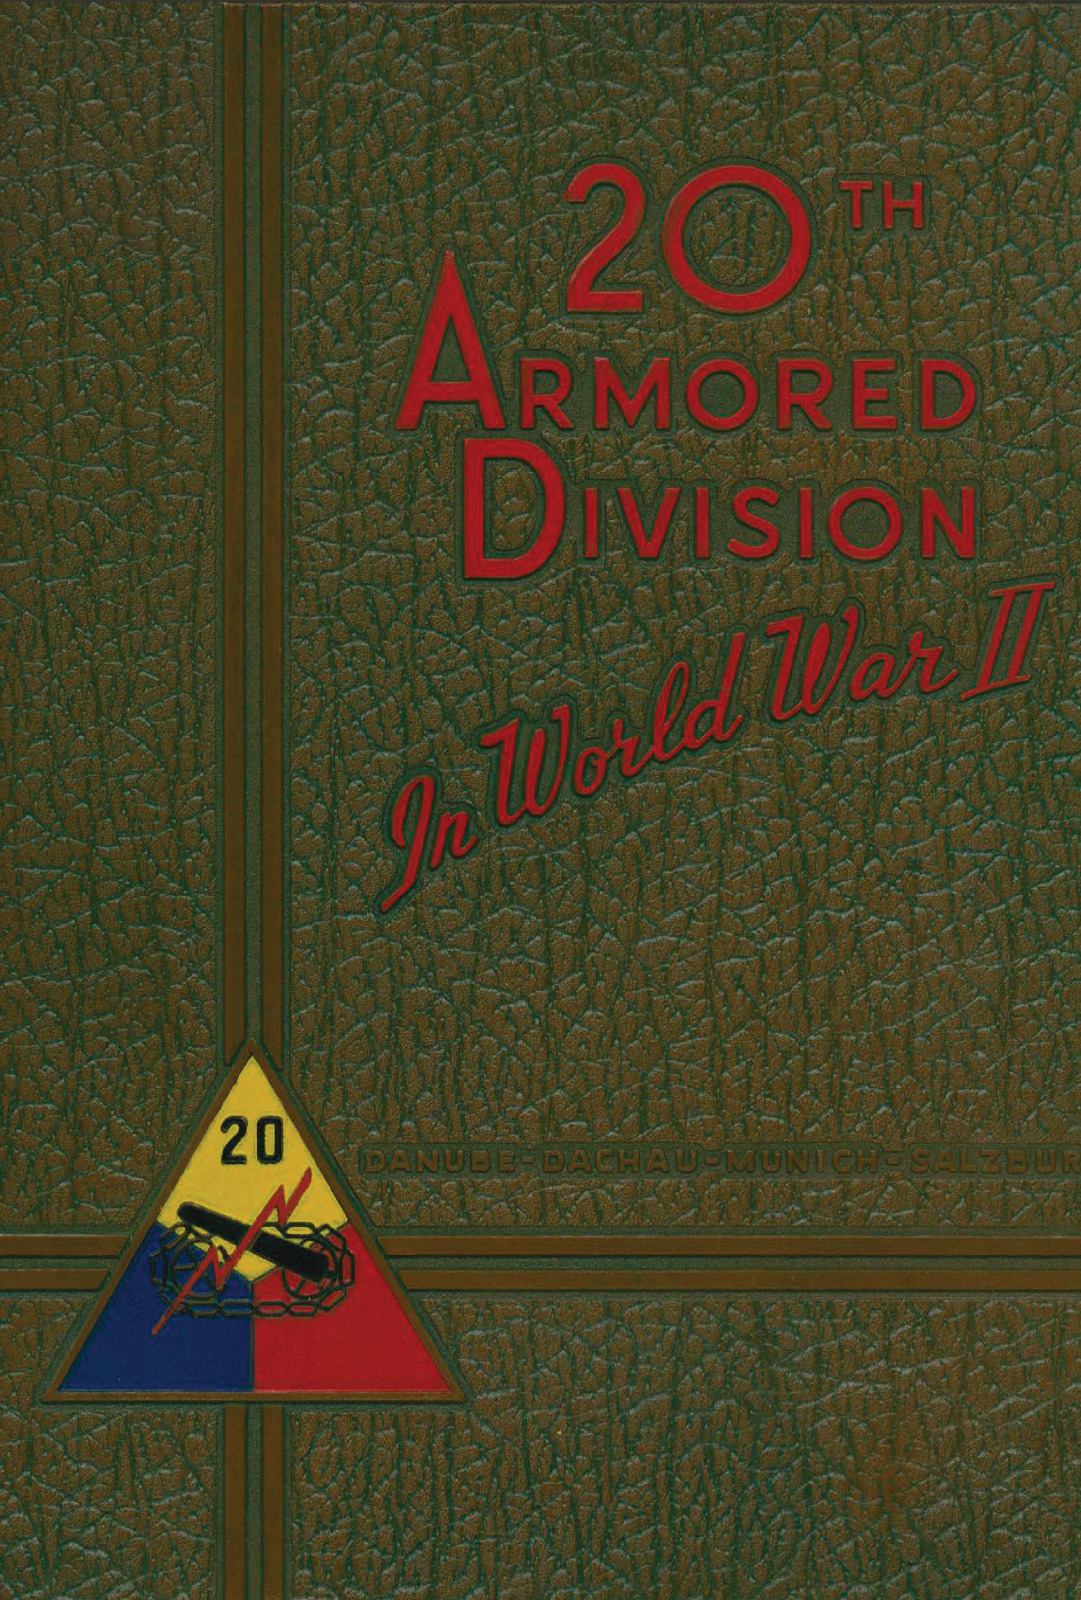 172 Page 20th Armor Division In ETO 1946 Armored Tank History Book on Data CD